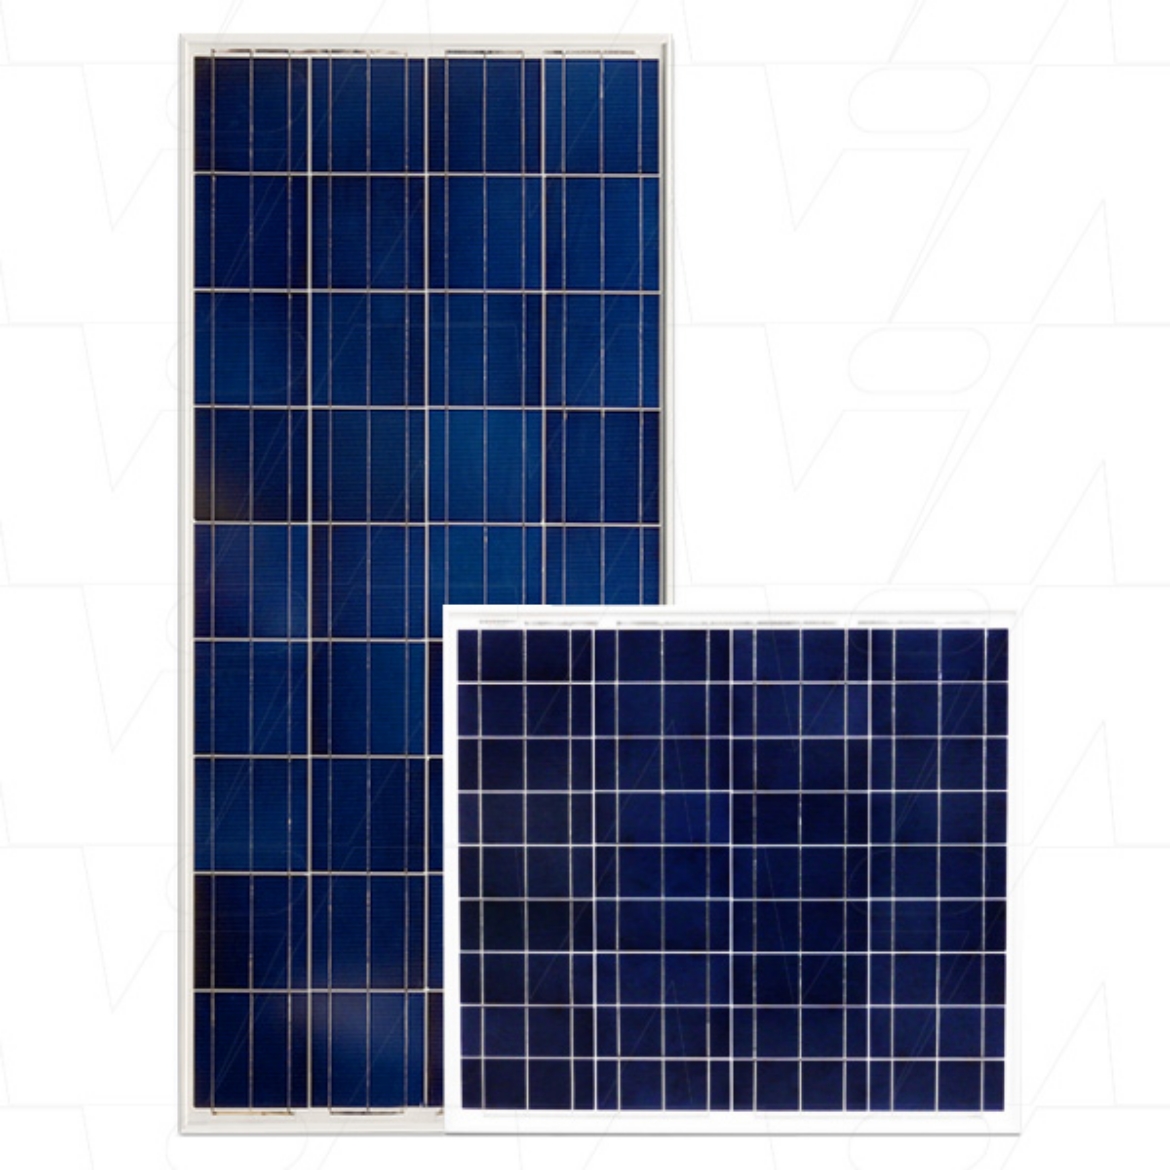 Picture of 20V 270W 8.52A 60 CELL VICTRON BLUESOLAR POLYCRYSTALLINE SOLAR PANEL